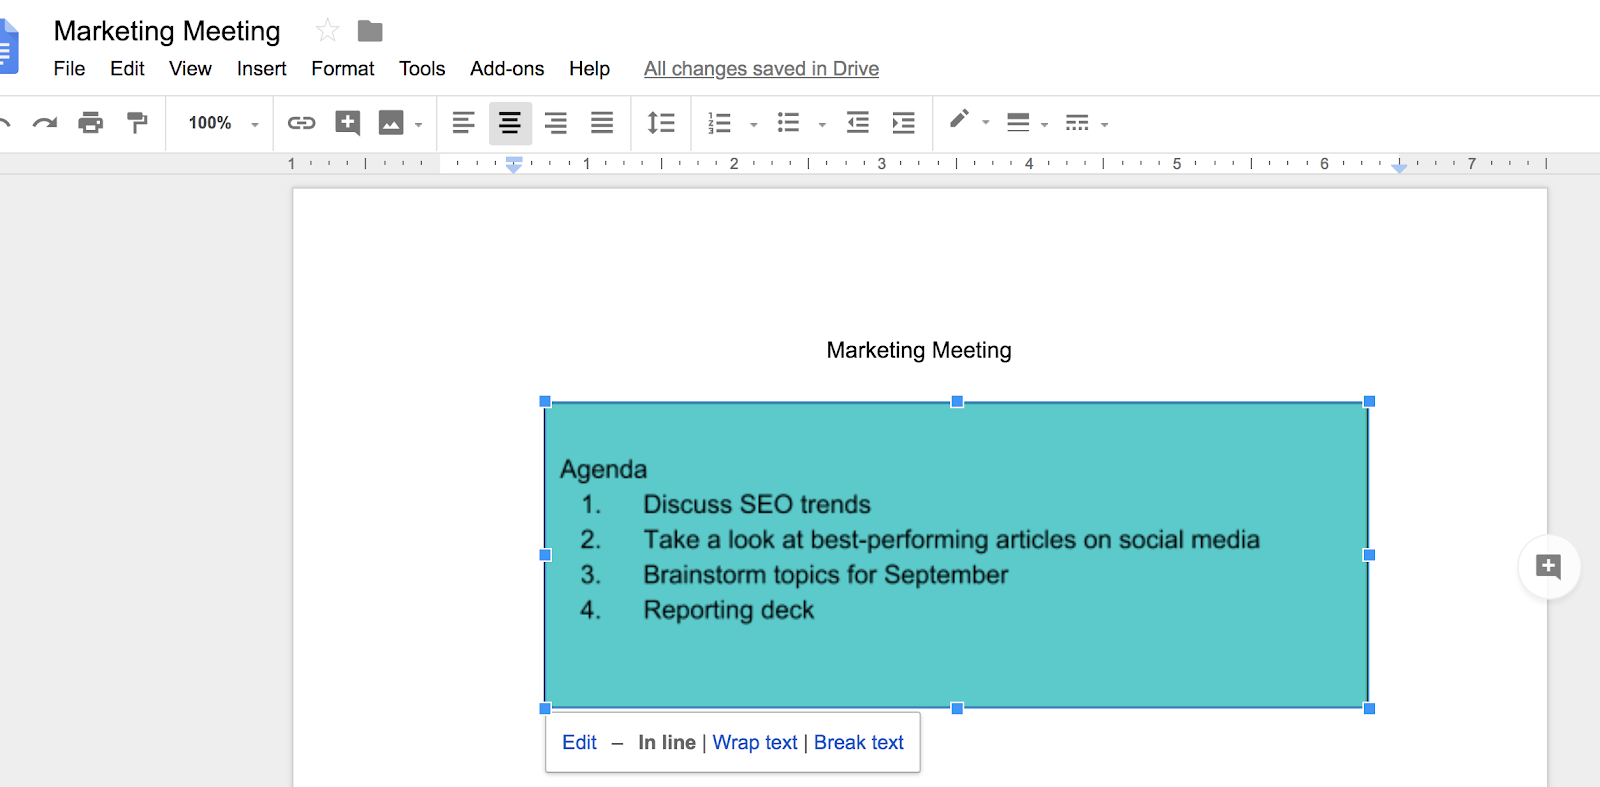 how to add text boxes to google docs